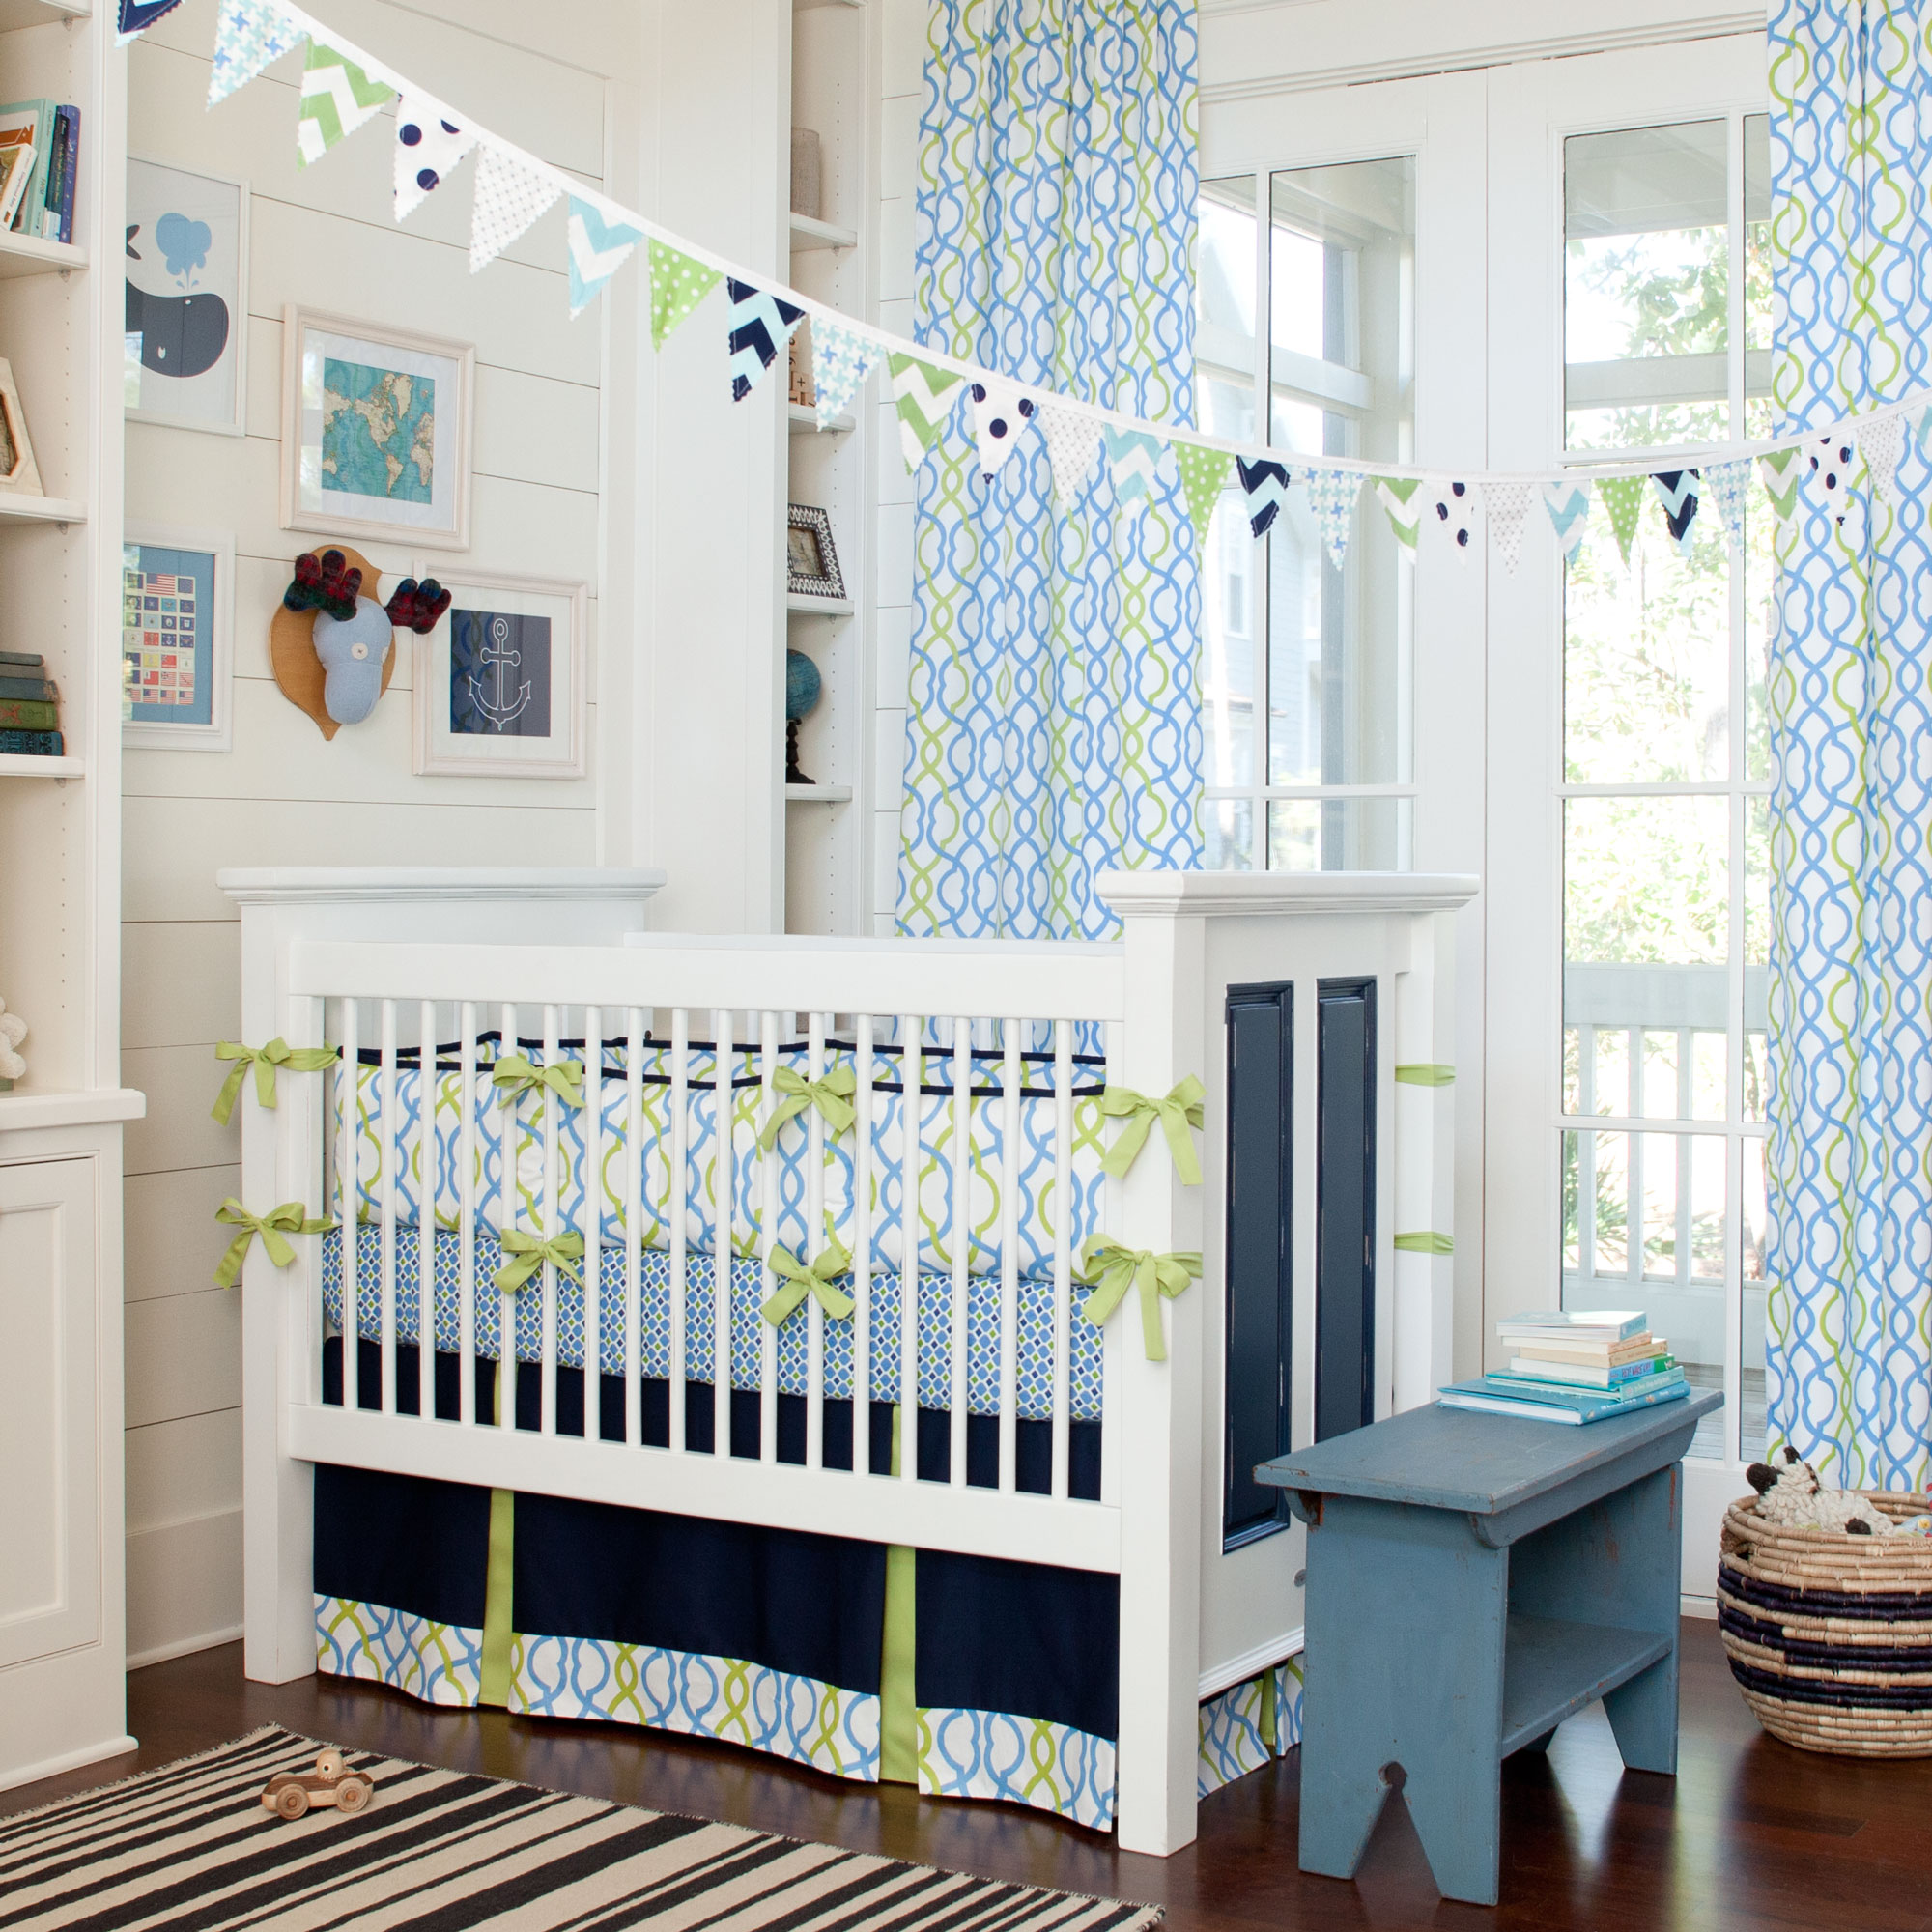 Blue Themed With Trendy Blue Themed Nursery Idea With Baby Boy Crib Bedding Decorated With Patterned Banners And Curtain  Enchanting Baby Boy Crib Bedding Applied In Colorful Baby Room